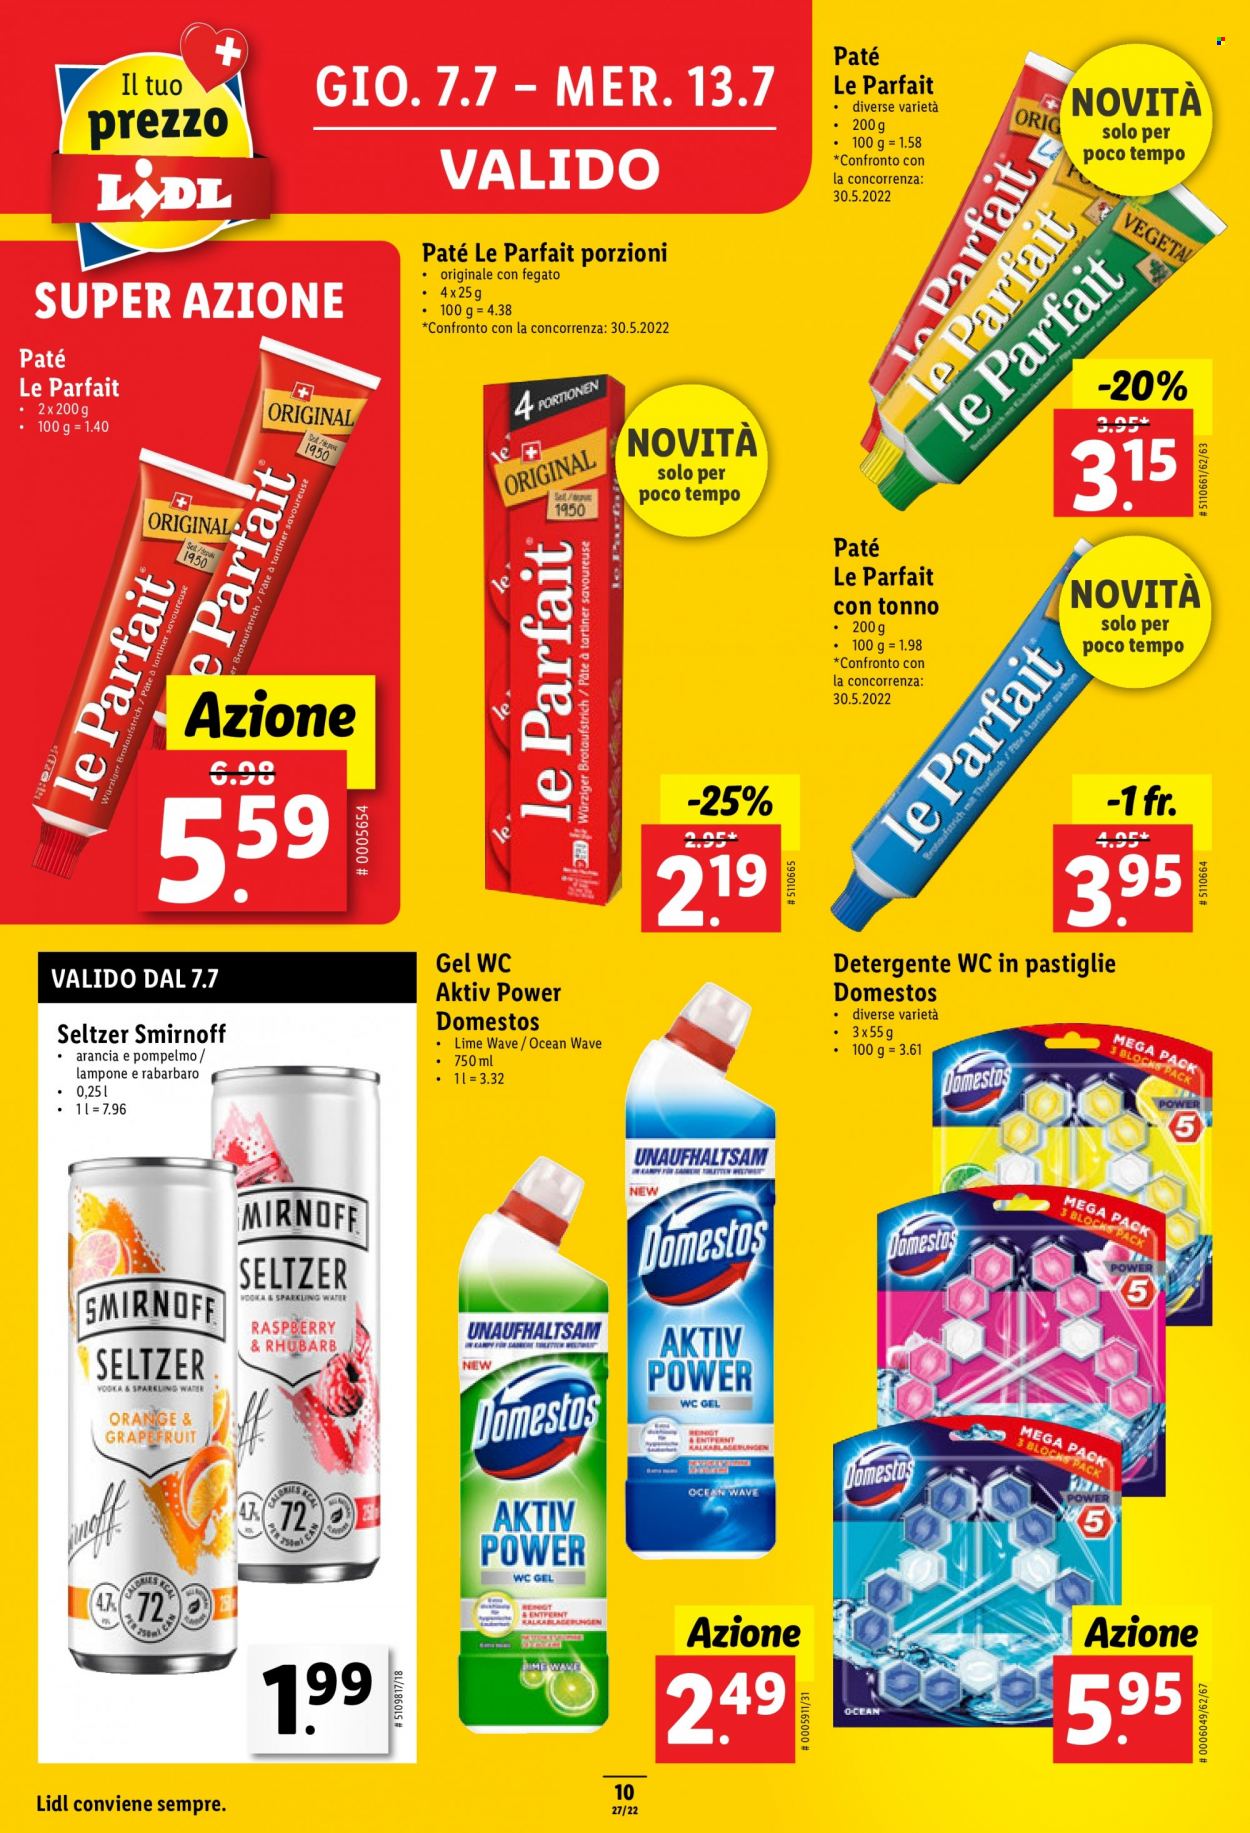 Catalogue Lidl - 7.7.2022 - 13.7.2022. Page 10.